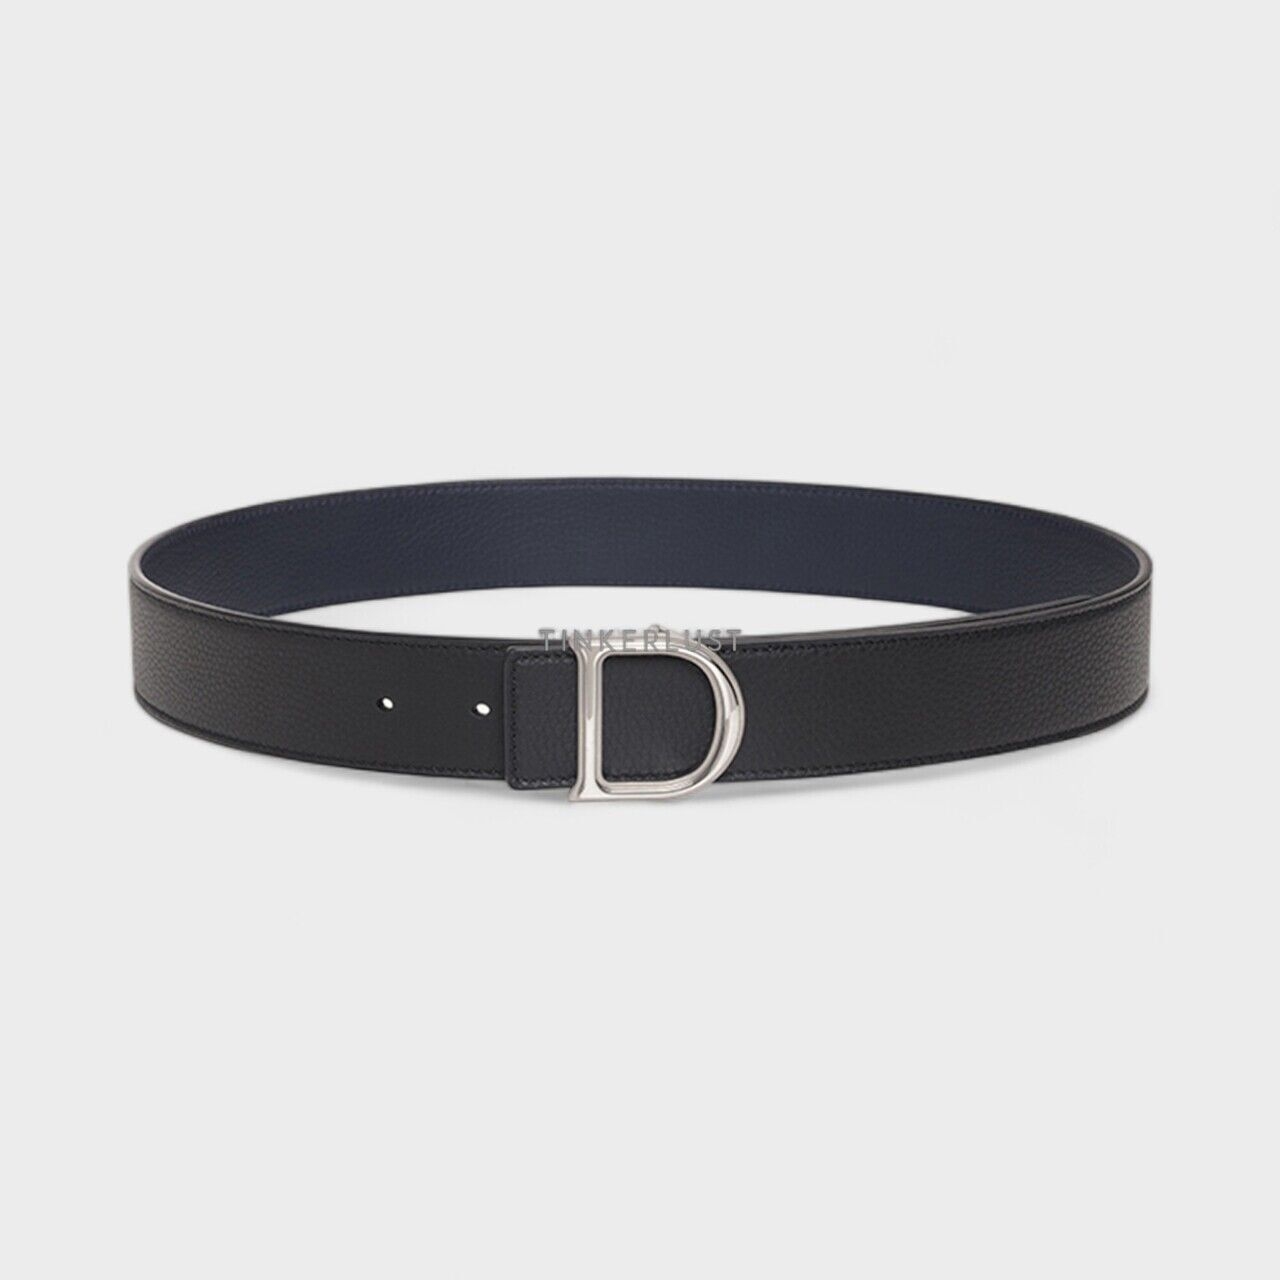 Christian Dior D Buckle Belt 35mm in Black/Navy Blue Grained Leather SHW